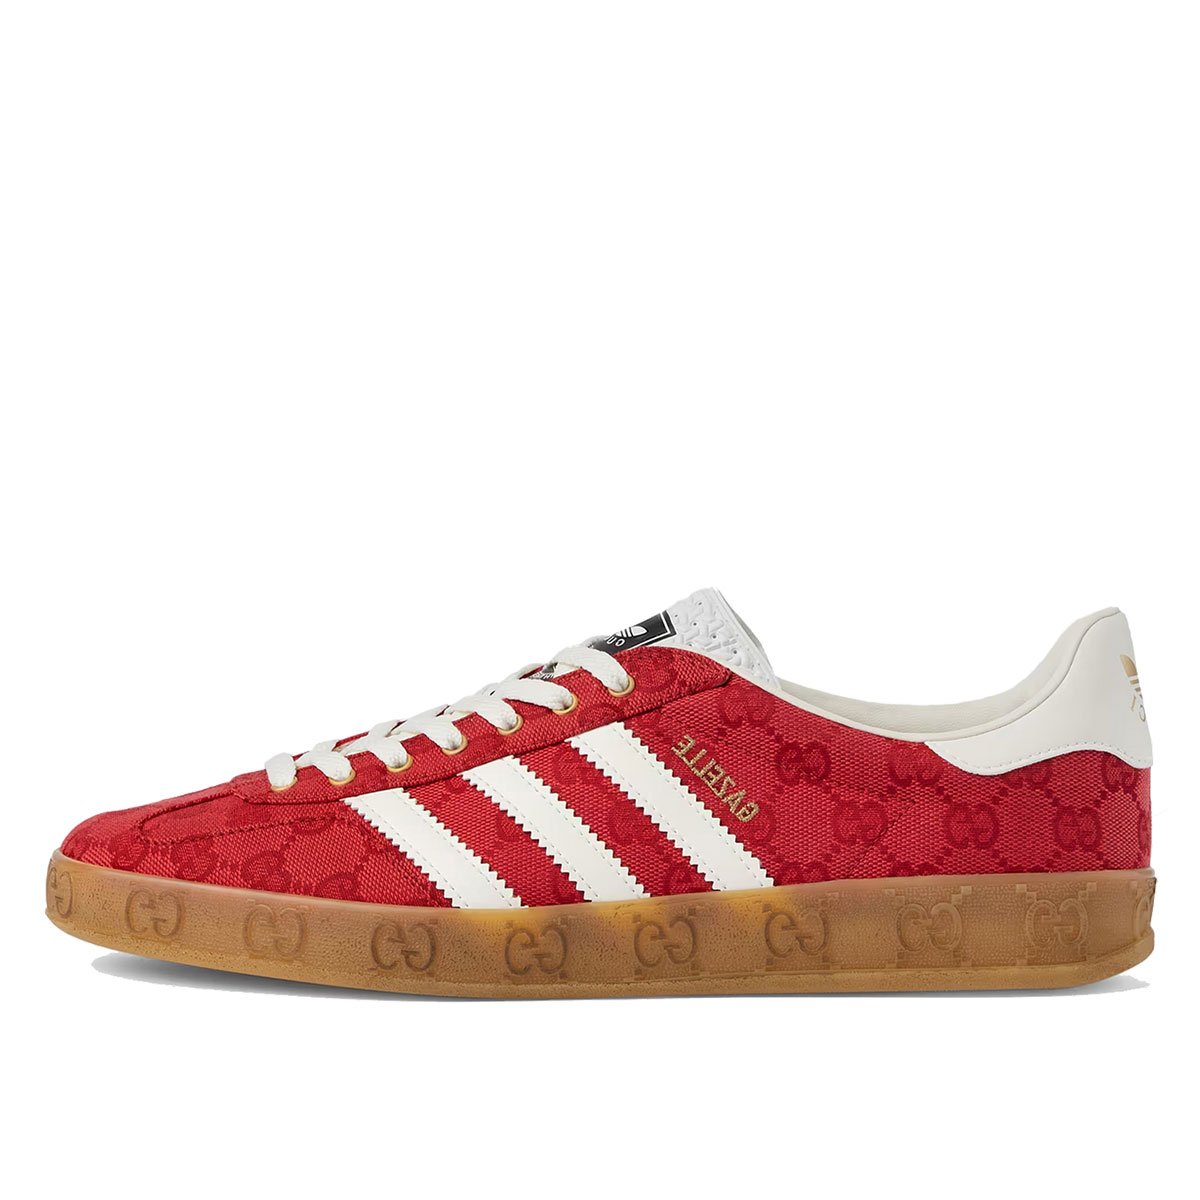 adidas gazelle red and white